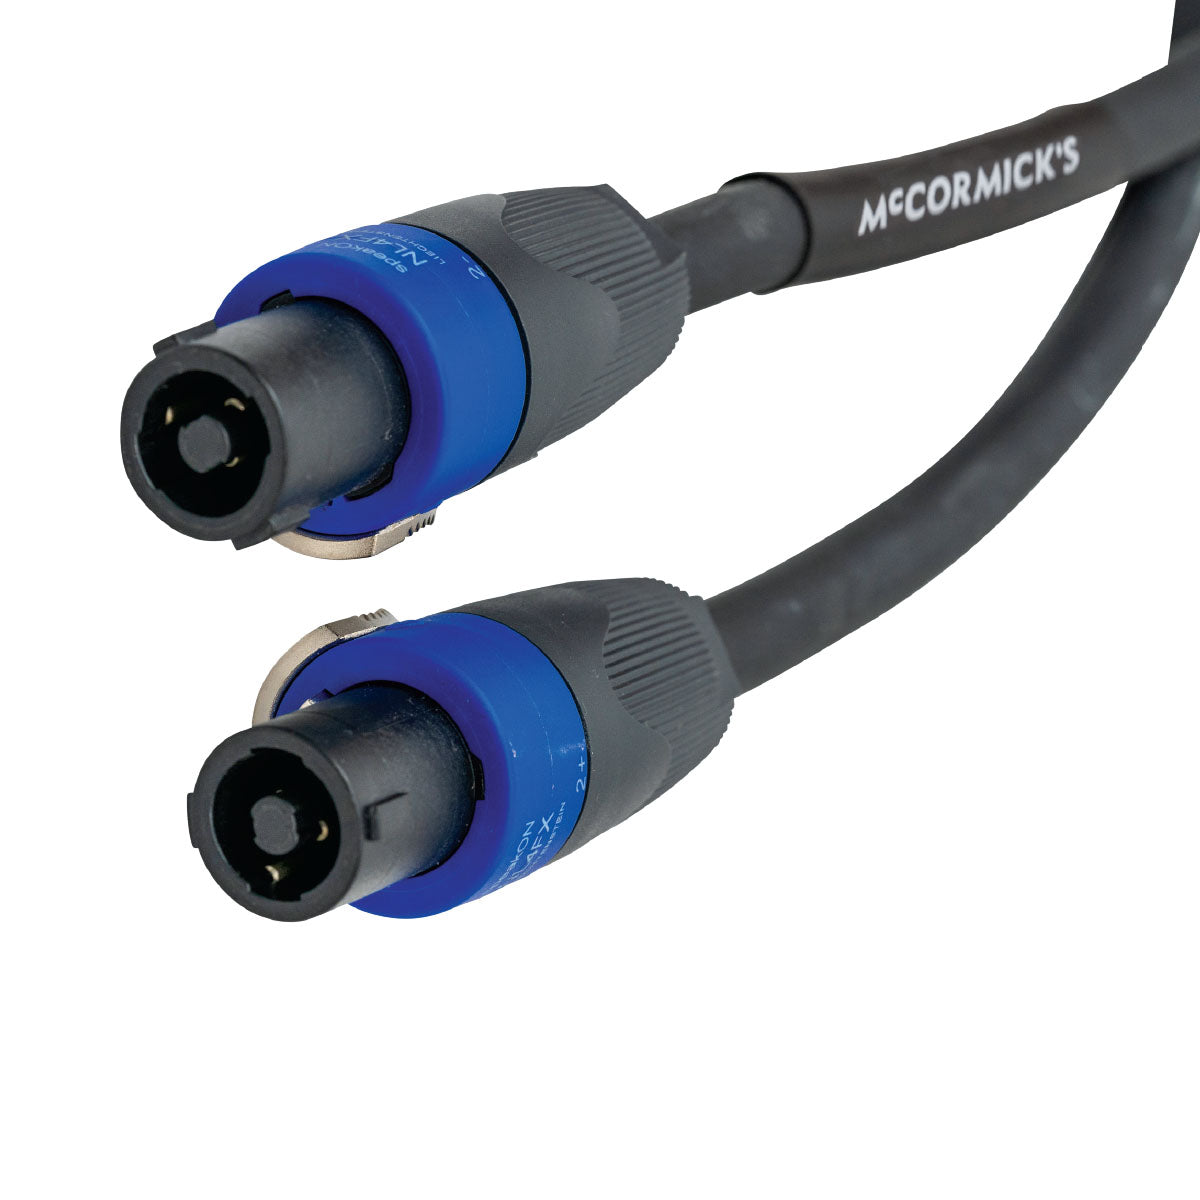 McCormick’s 2-wire Speaker Cable